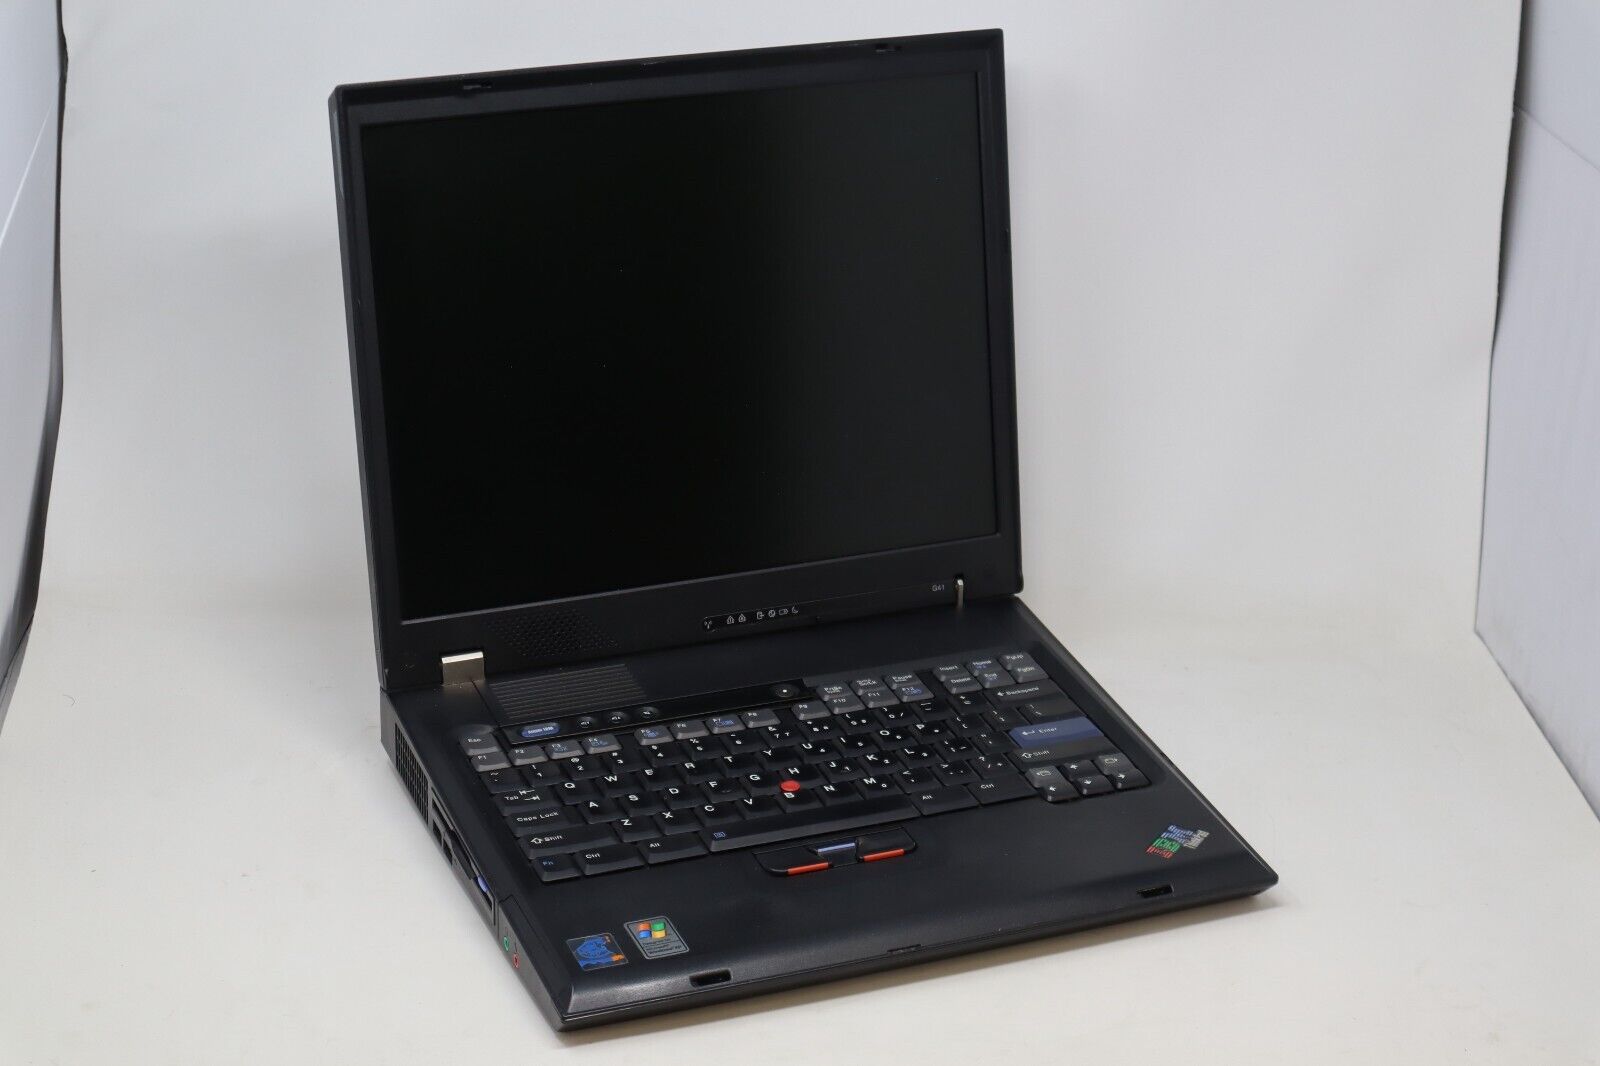 IBM ThinkPad G41 Vintage Laptop | Classic Design for Collectors